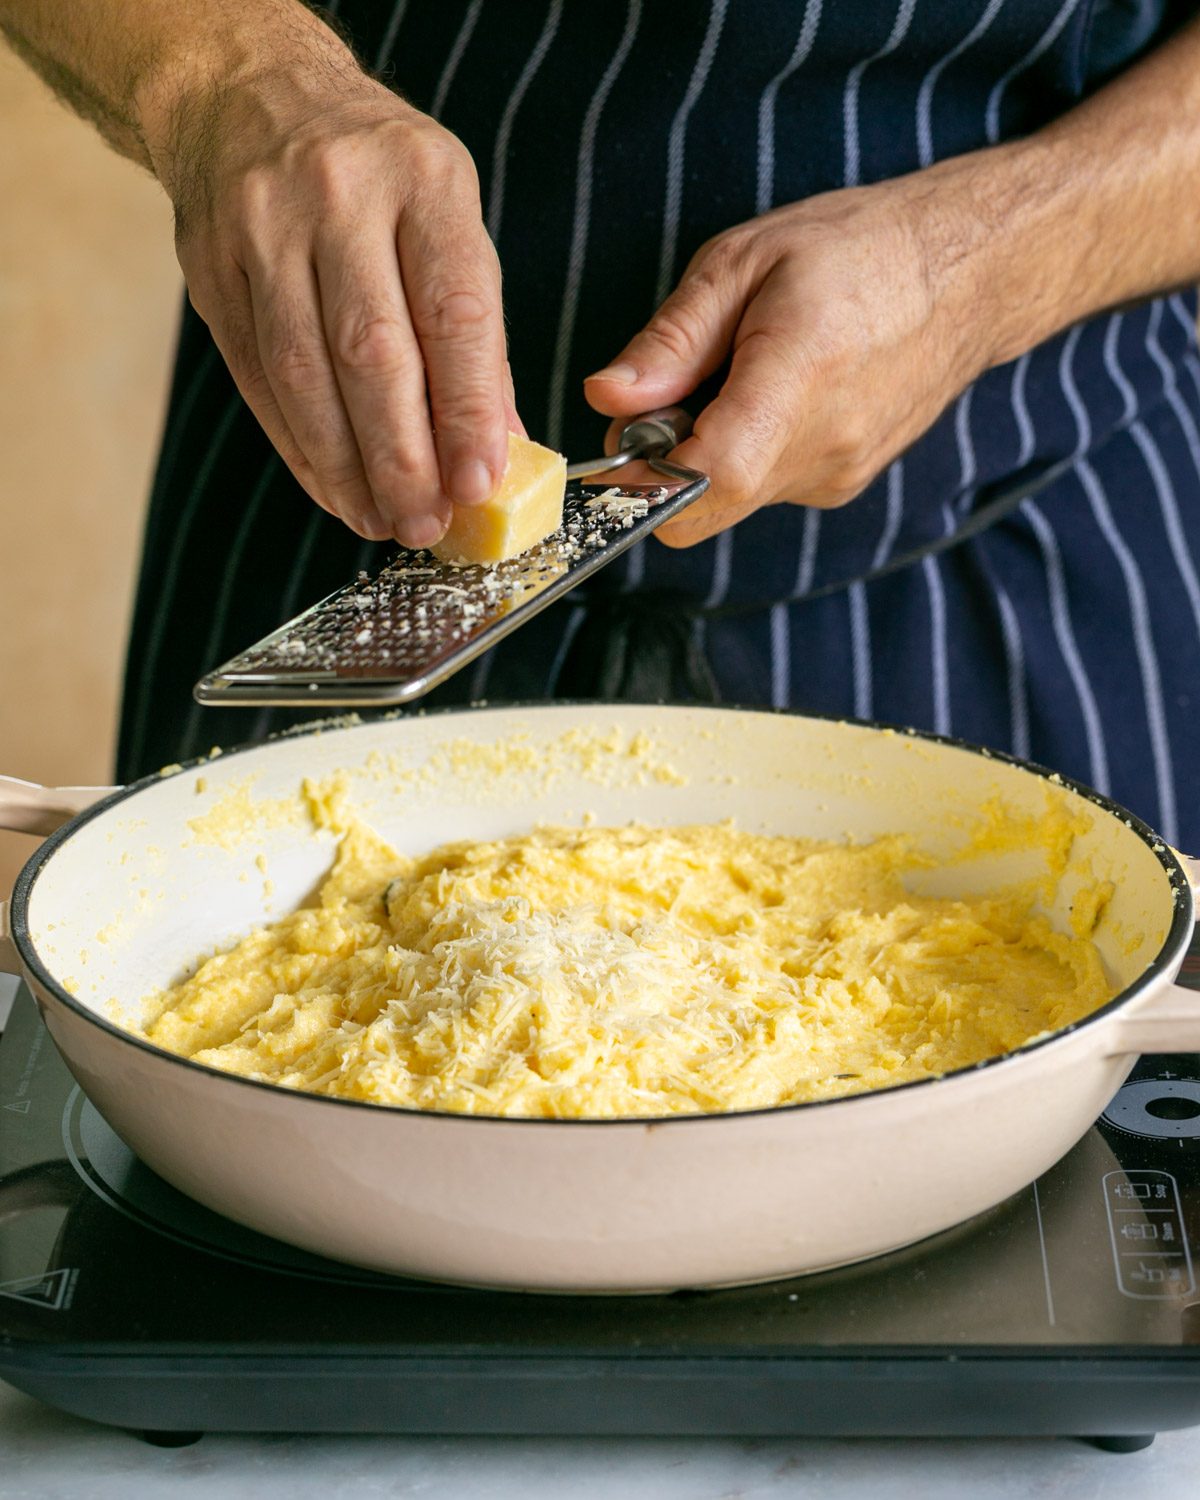 Grating cheese into cooked polenta